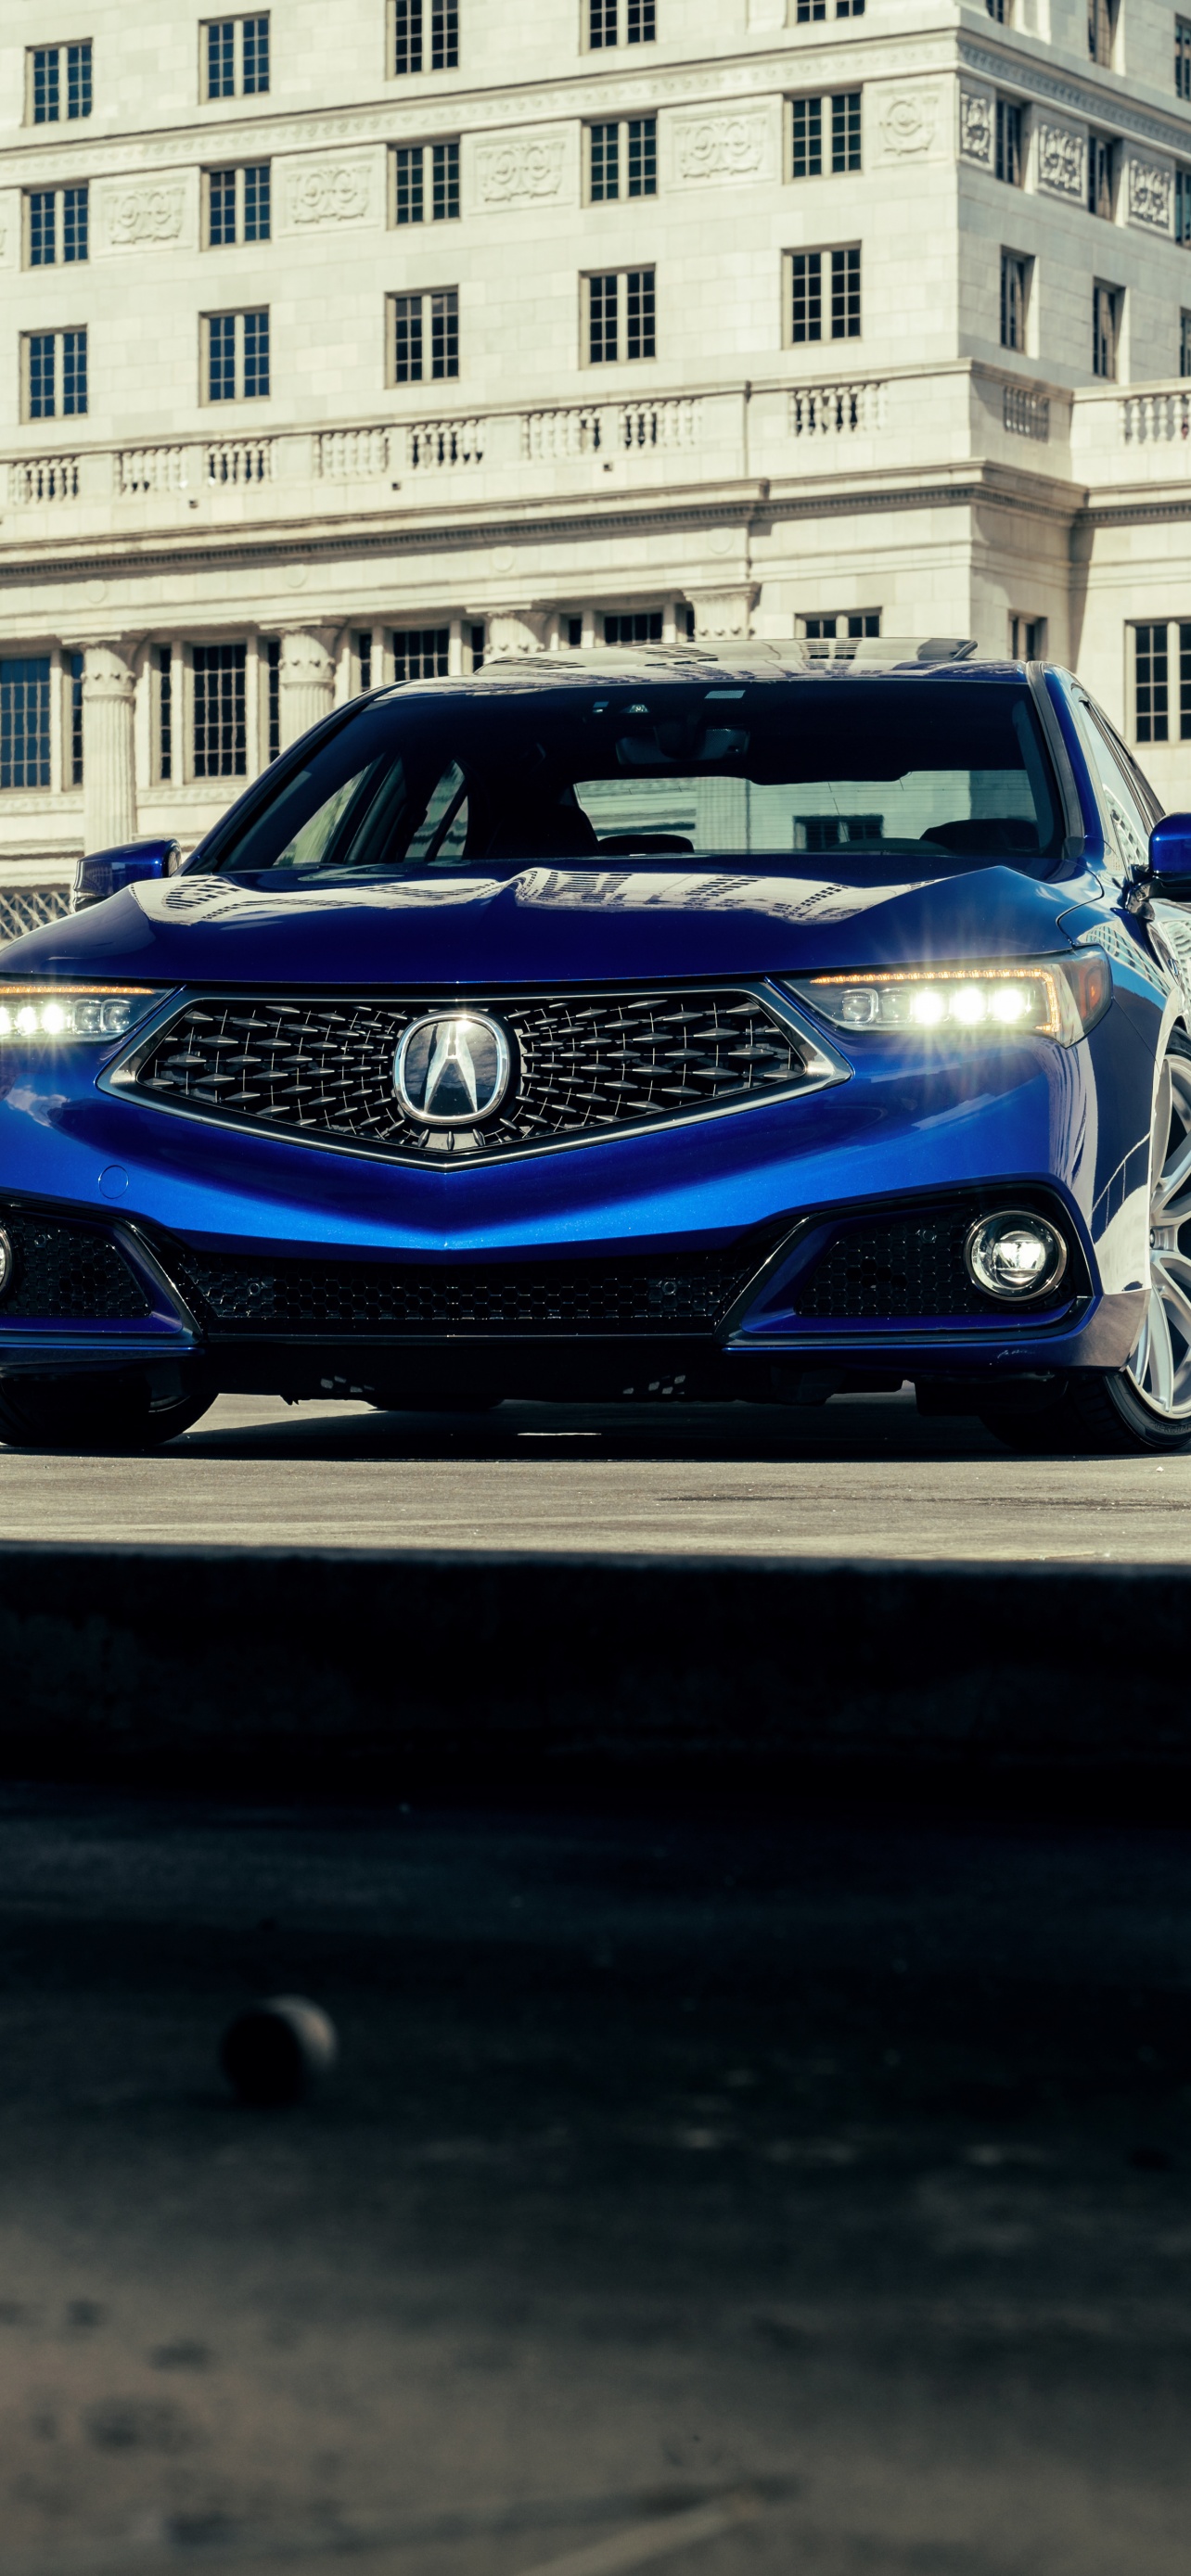 Download Acura wallpapers for mobile phone free Acura HD pictures